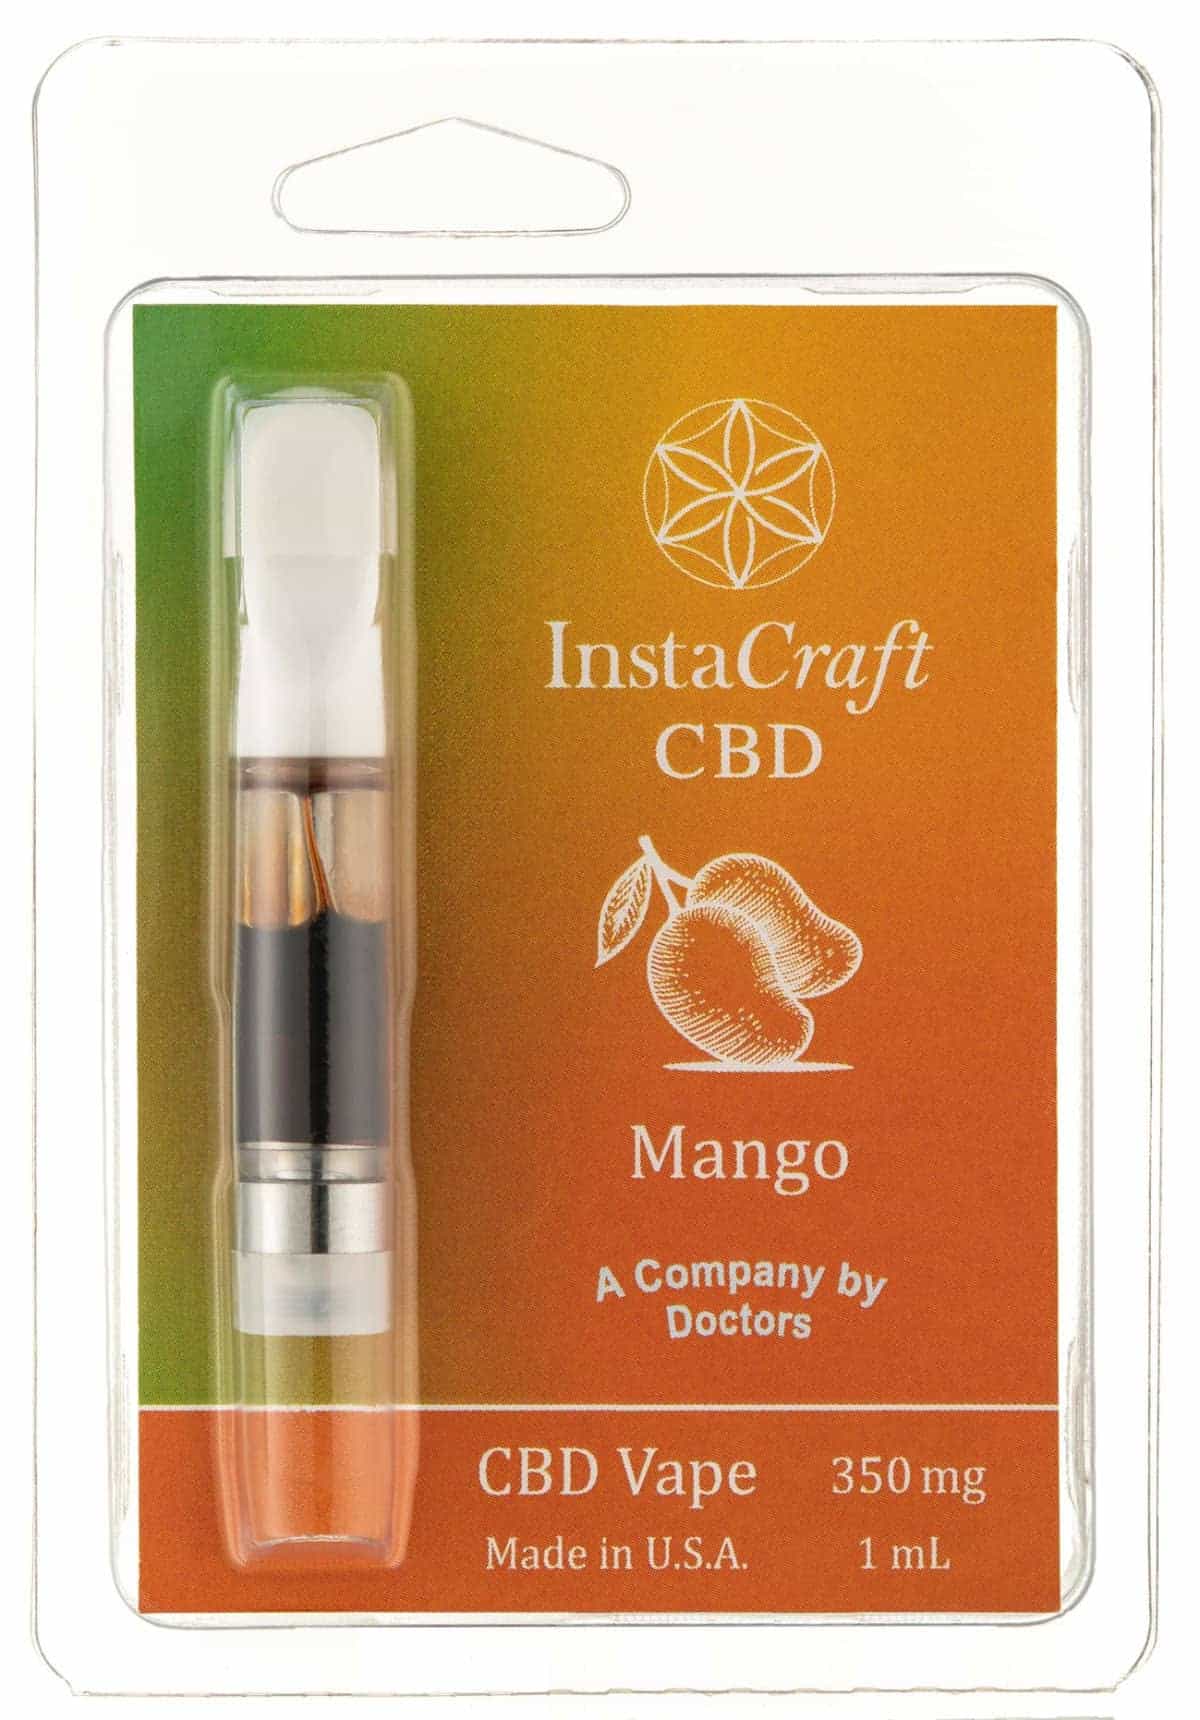 Front of Mango Vape package. Premium hemp extract. Experience the difference with a Mango Vape by InstaCraft CBD. Full Spectrum benefits. 350 mg CBD.